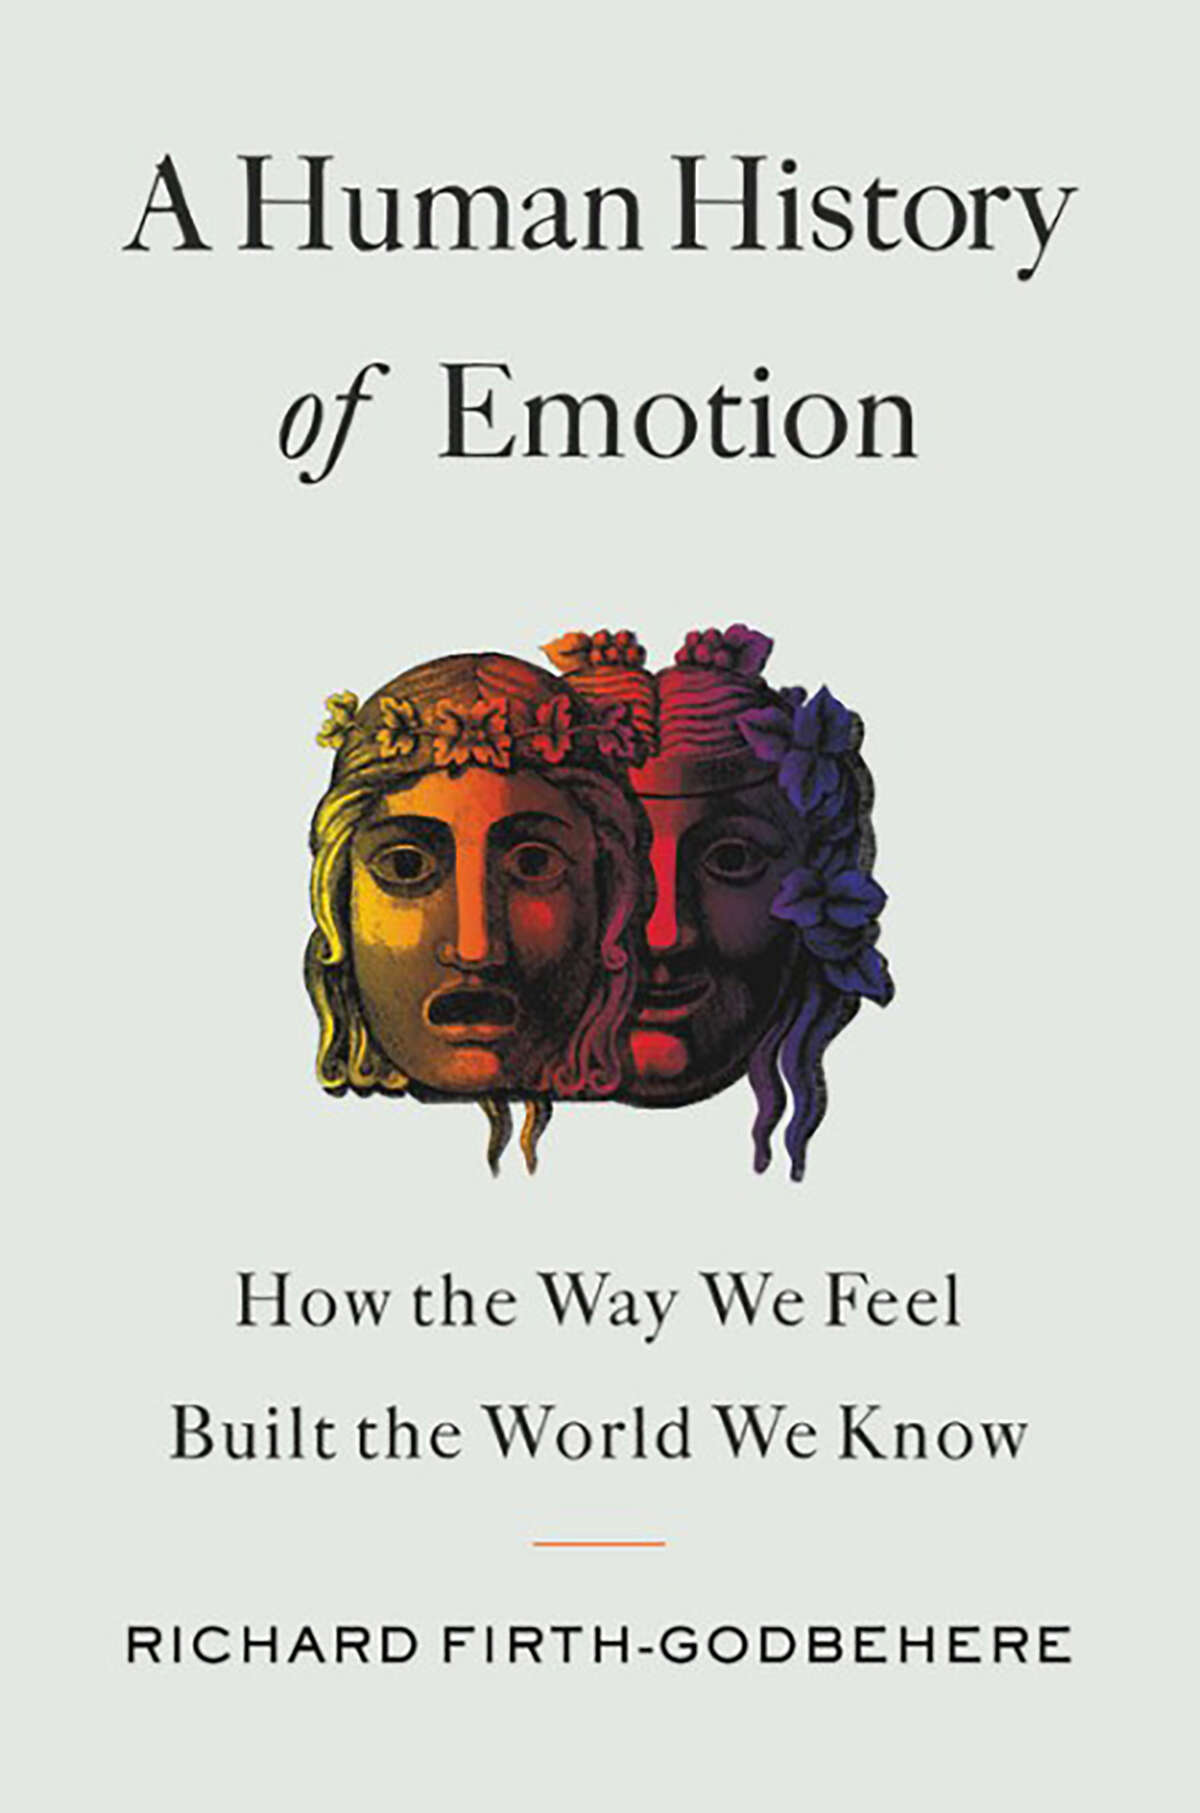 "A Human History of Emotion: How the Way We Feel Built the World We Know"